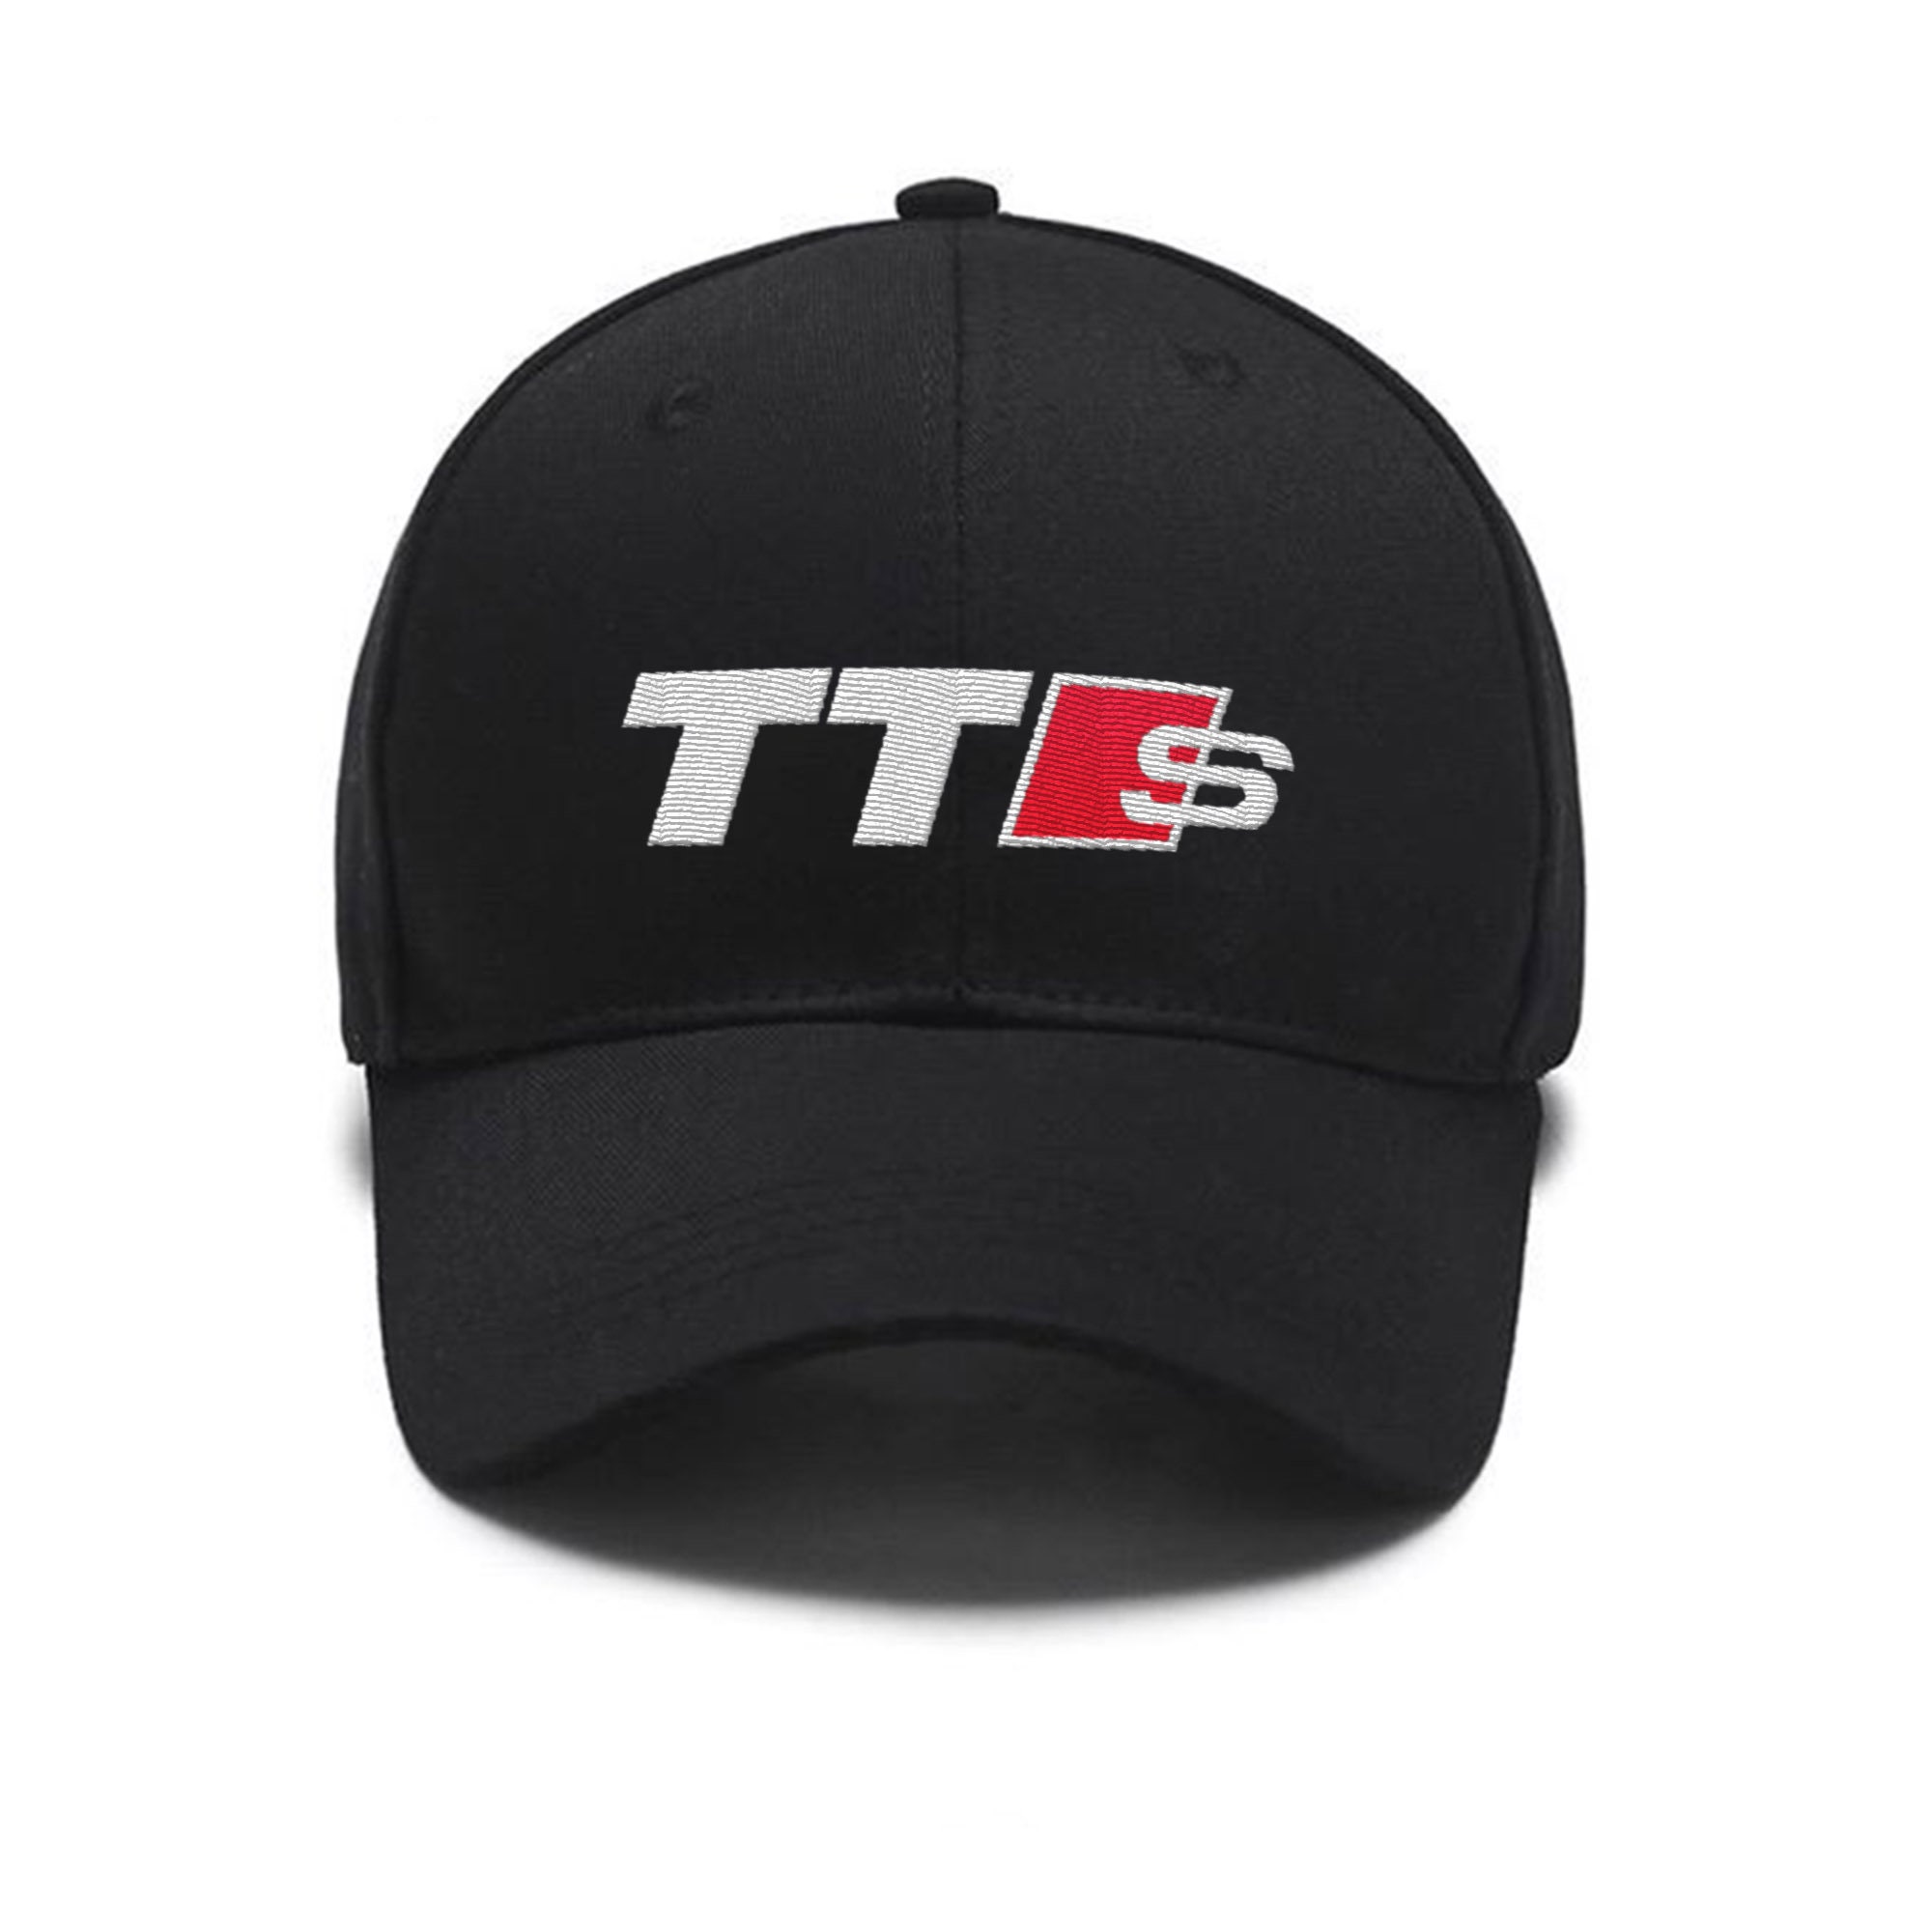 Discover Audi TT Embroidery hat, baseball embroidered cap